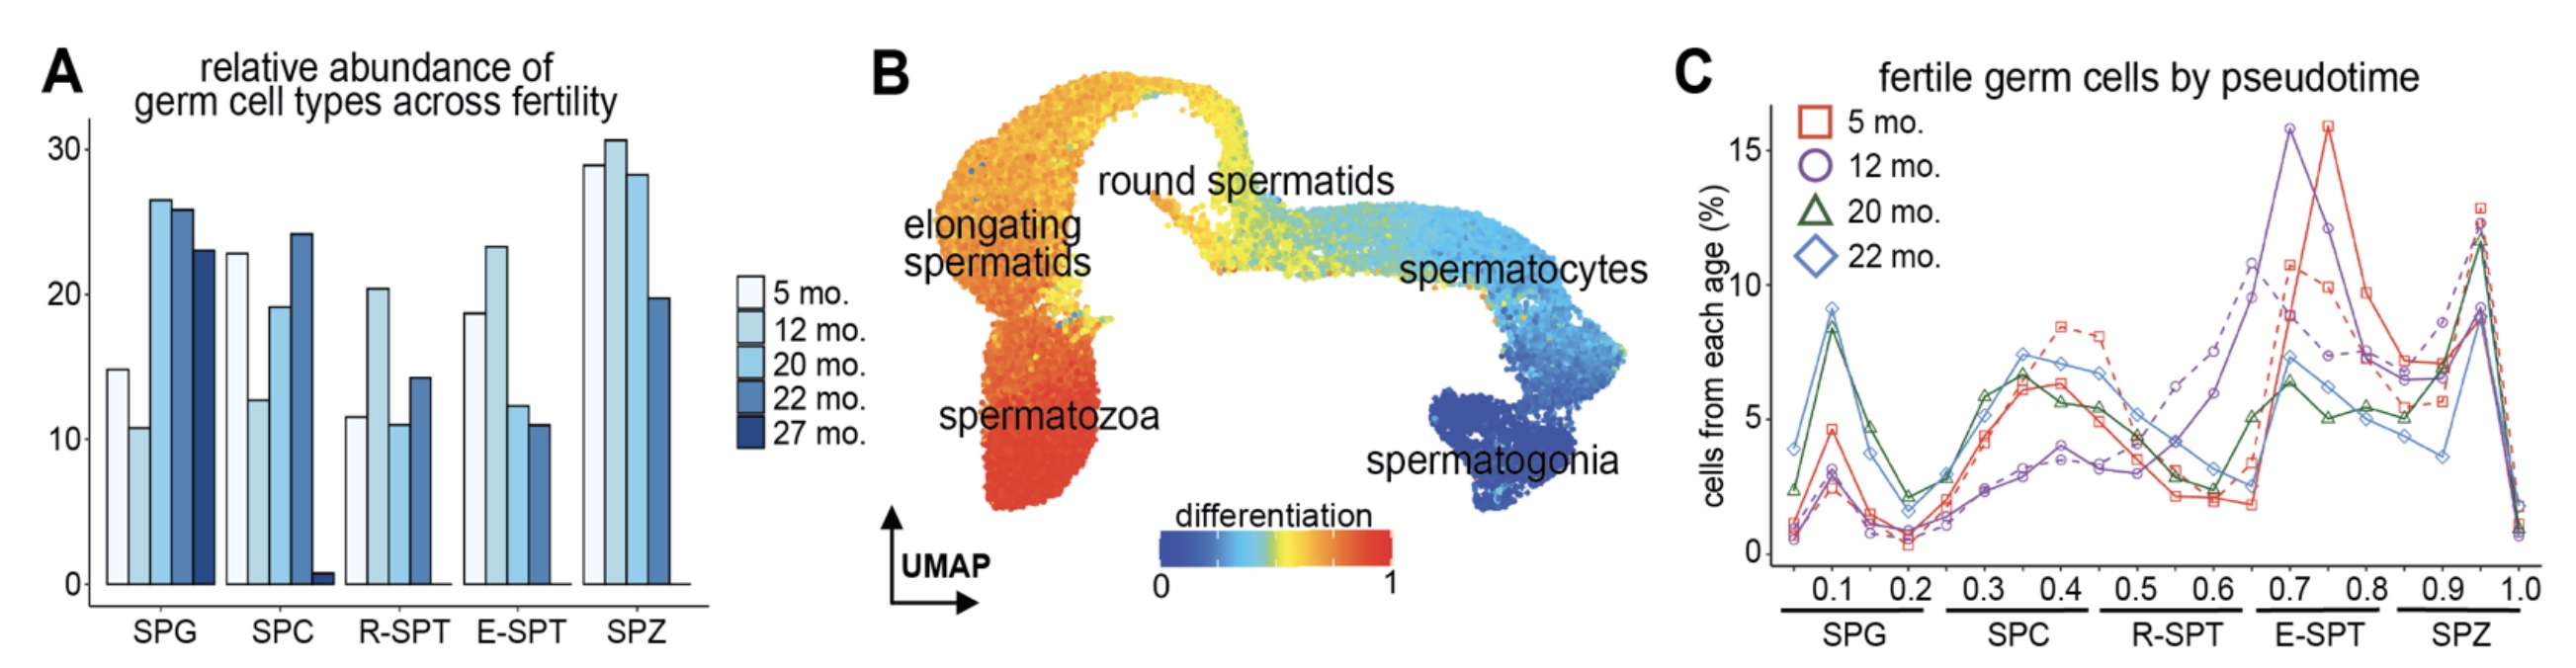 Figure from Sposato et al showing altered proportions of spermatocyte differentiation in aged testes.